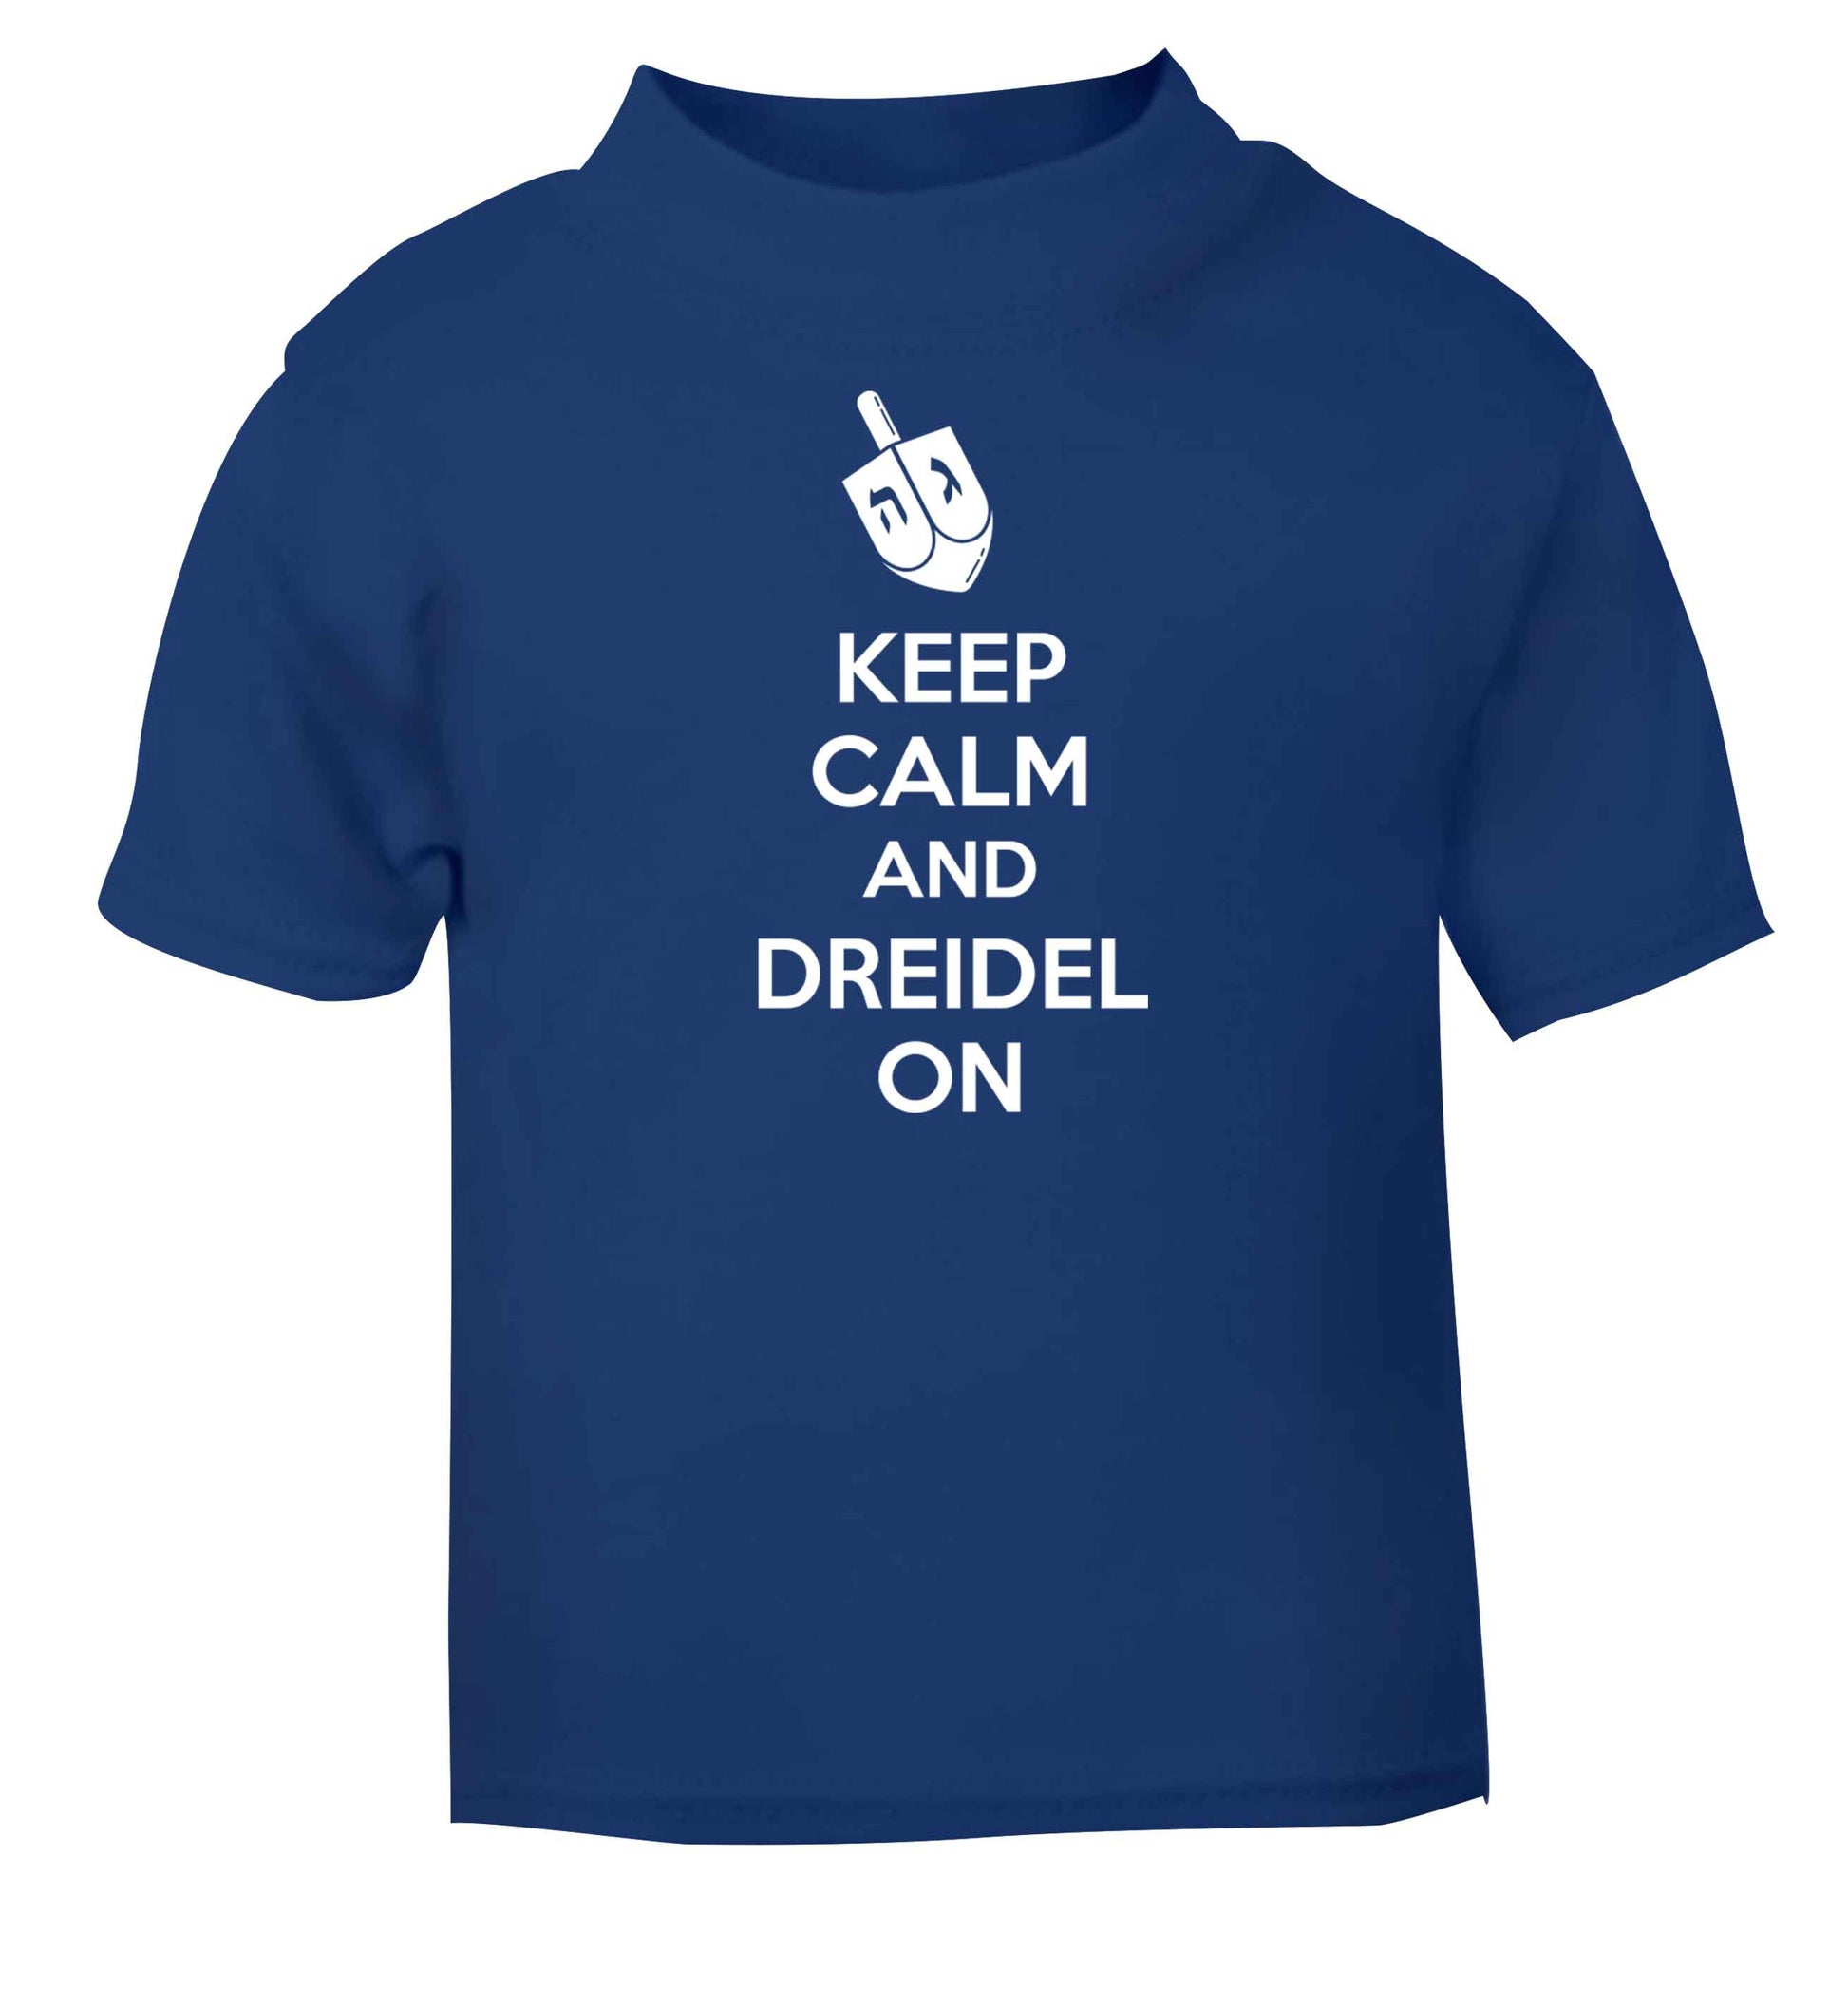 Keep calm and dreidel on blue baby toddler Tshirt 2 Years